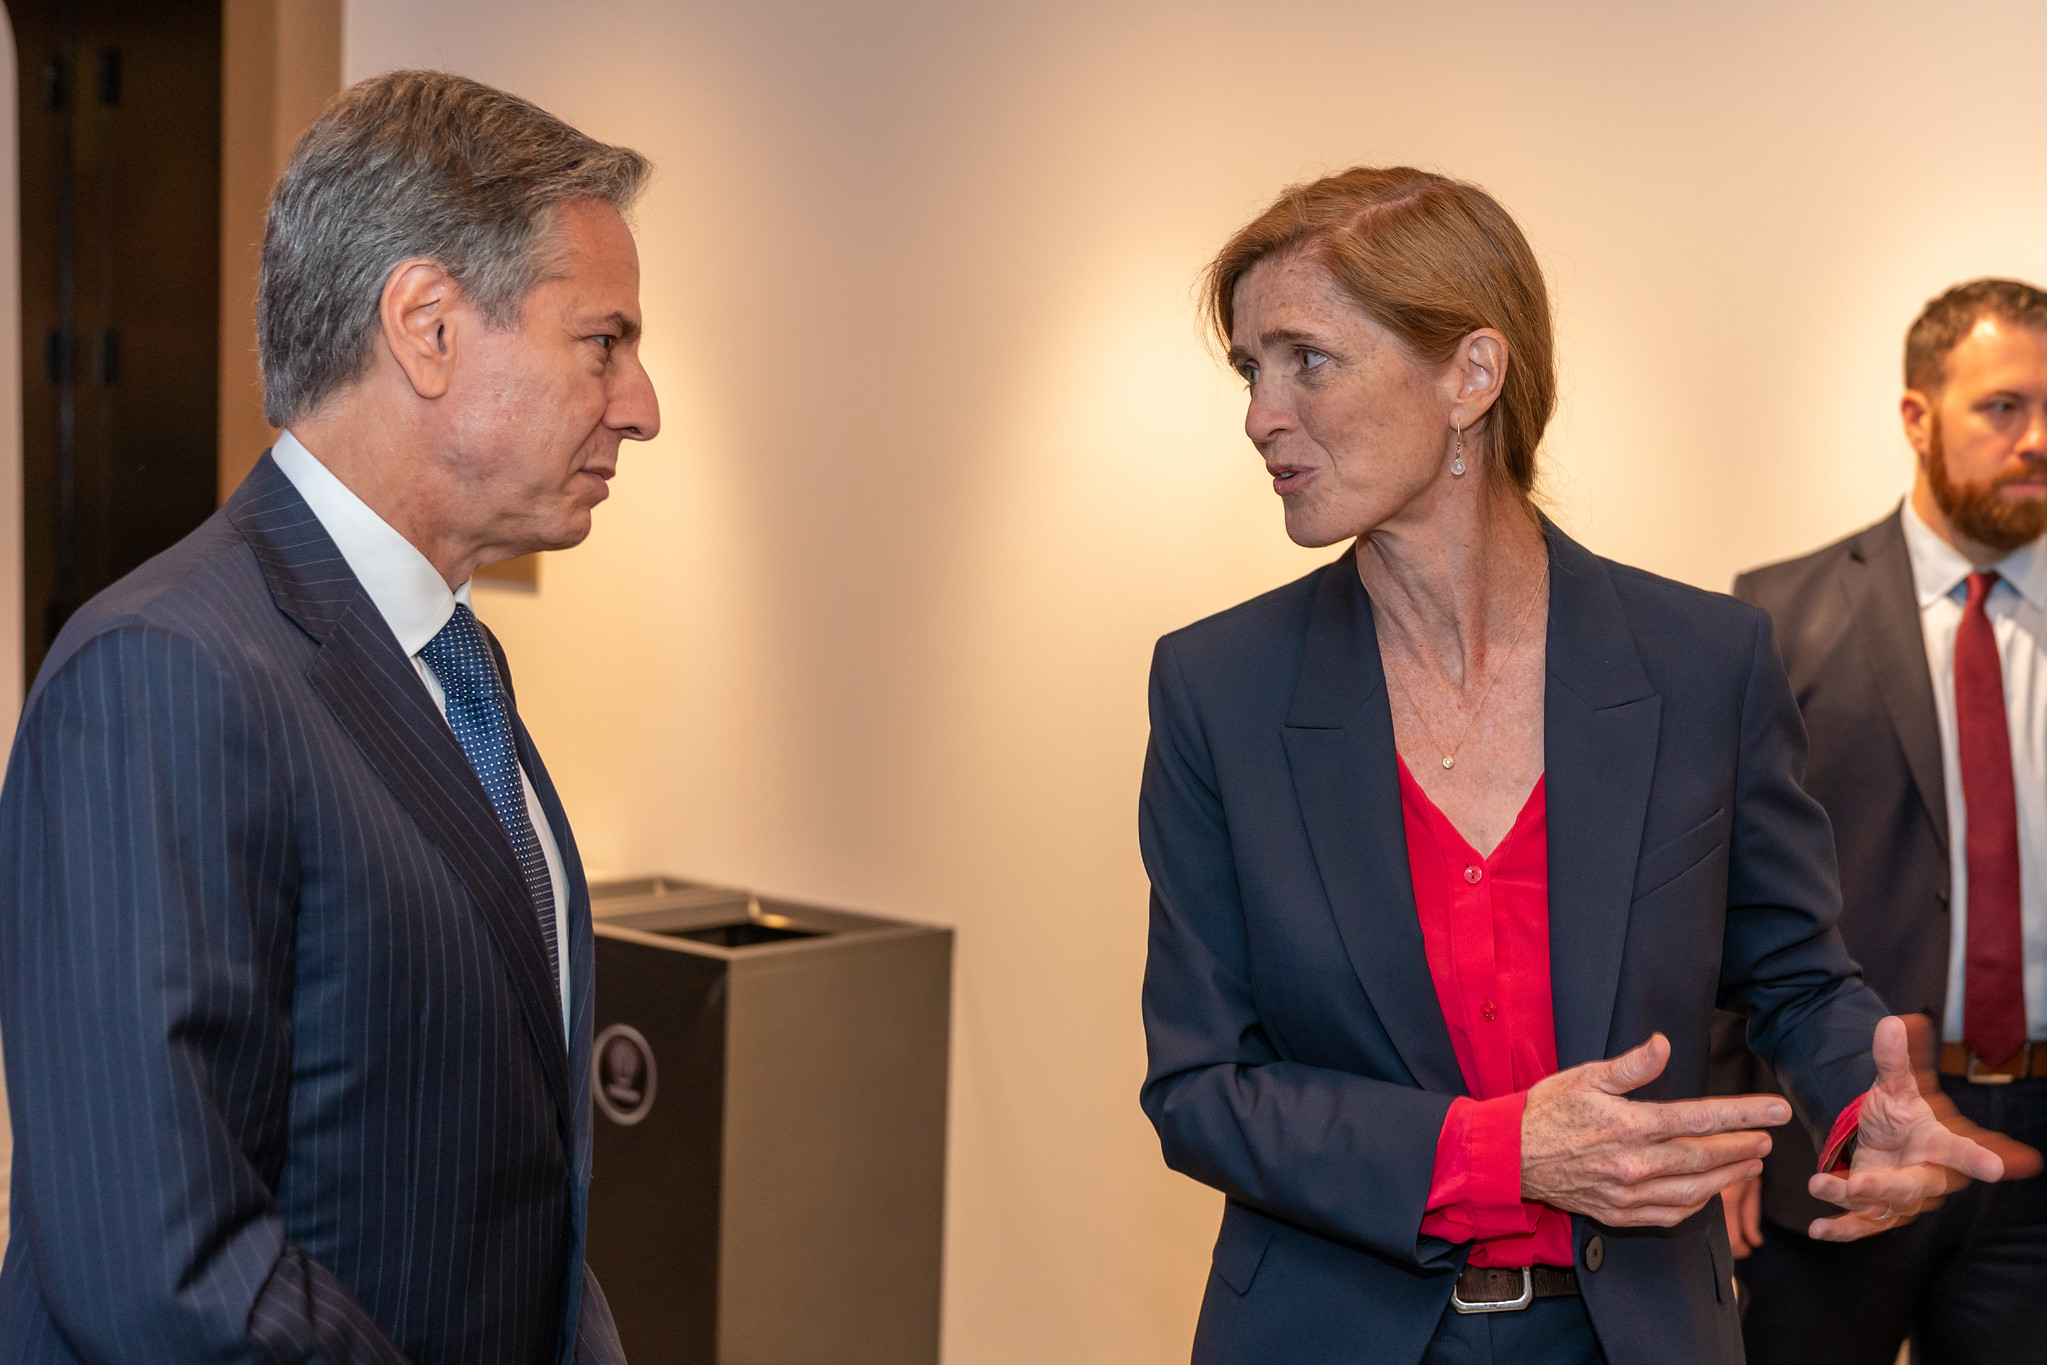 Samantha Power, the Genocide Expert, Fails to Address the Issue.